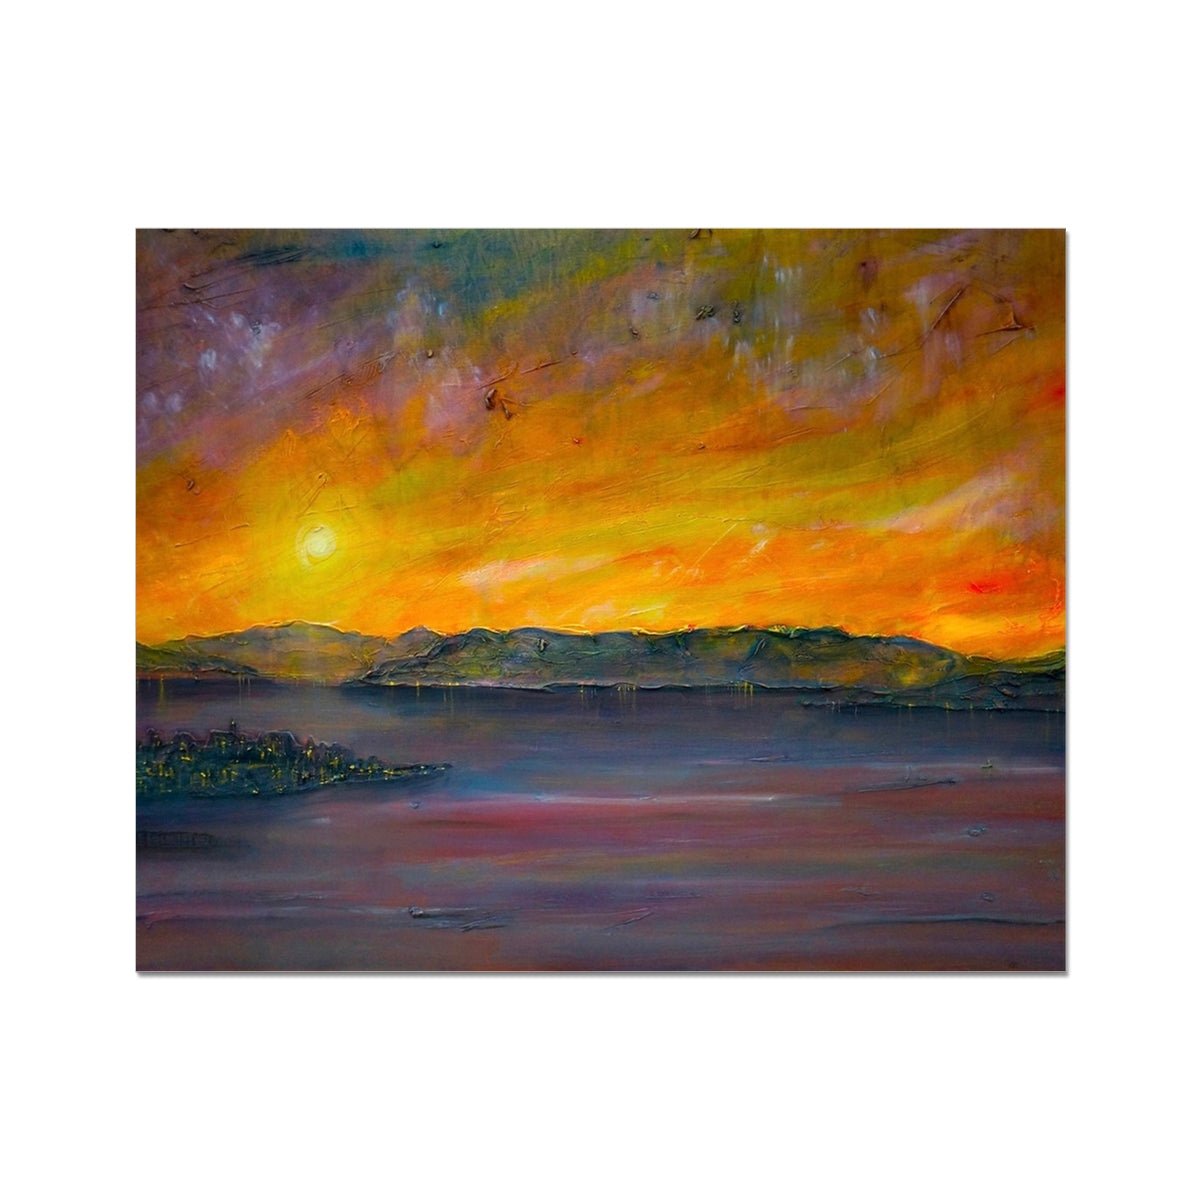 Sunset Over Gourock Painting | Artist Proof Collector Prints From Scotland-Artist Proof Collector Prints-River Clyde Art Gallery-20"x16"-Paintings, Prints, Homeware, Art Gifts From Scotland By Scottish Artist Kevin Hunter